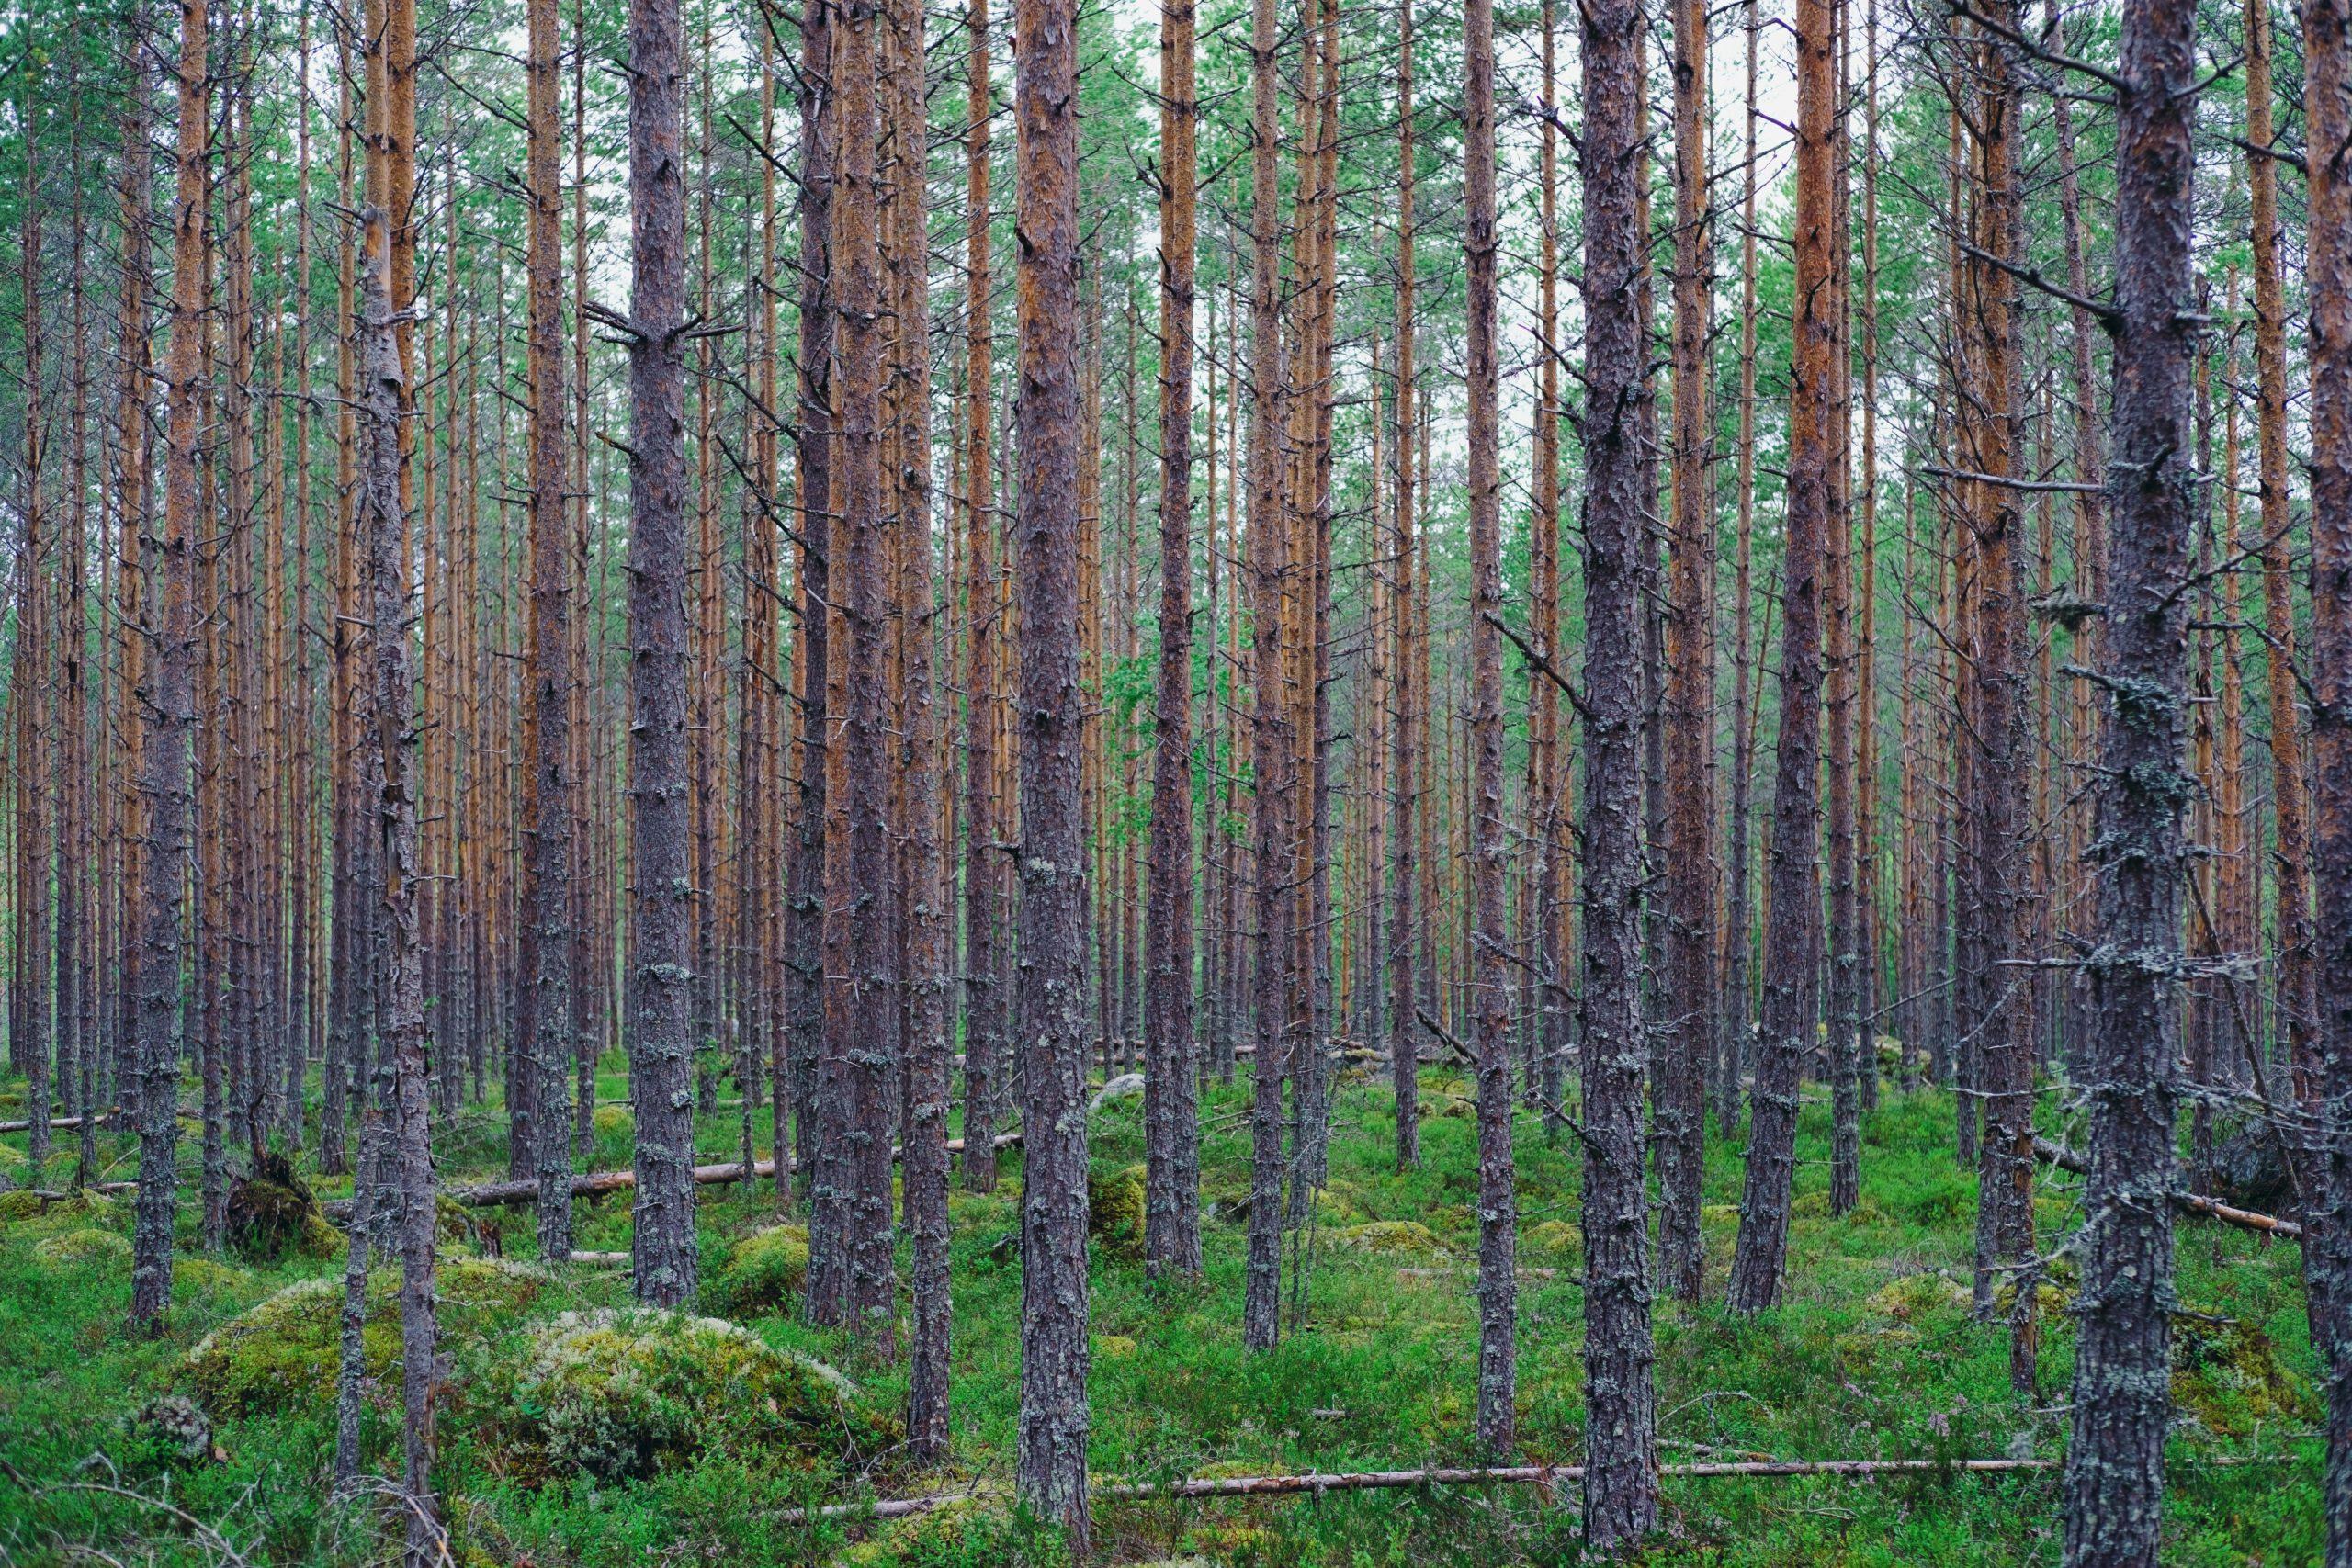 The healing effects on health of forests